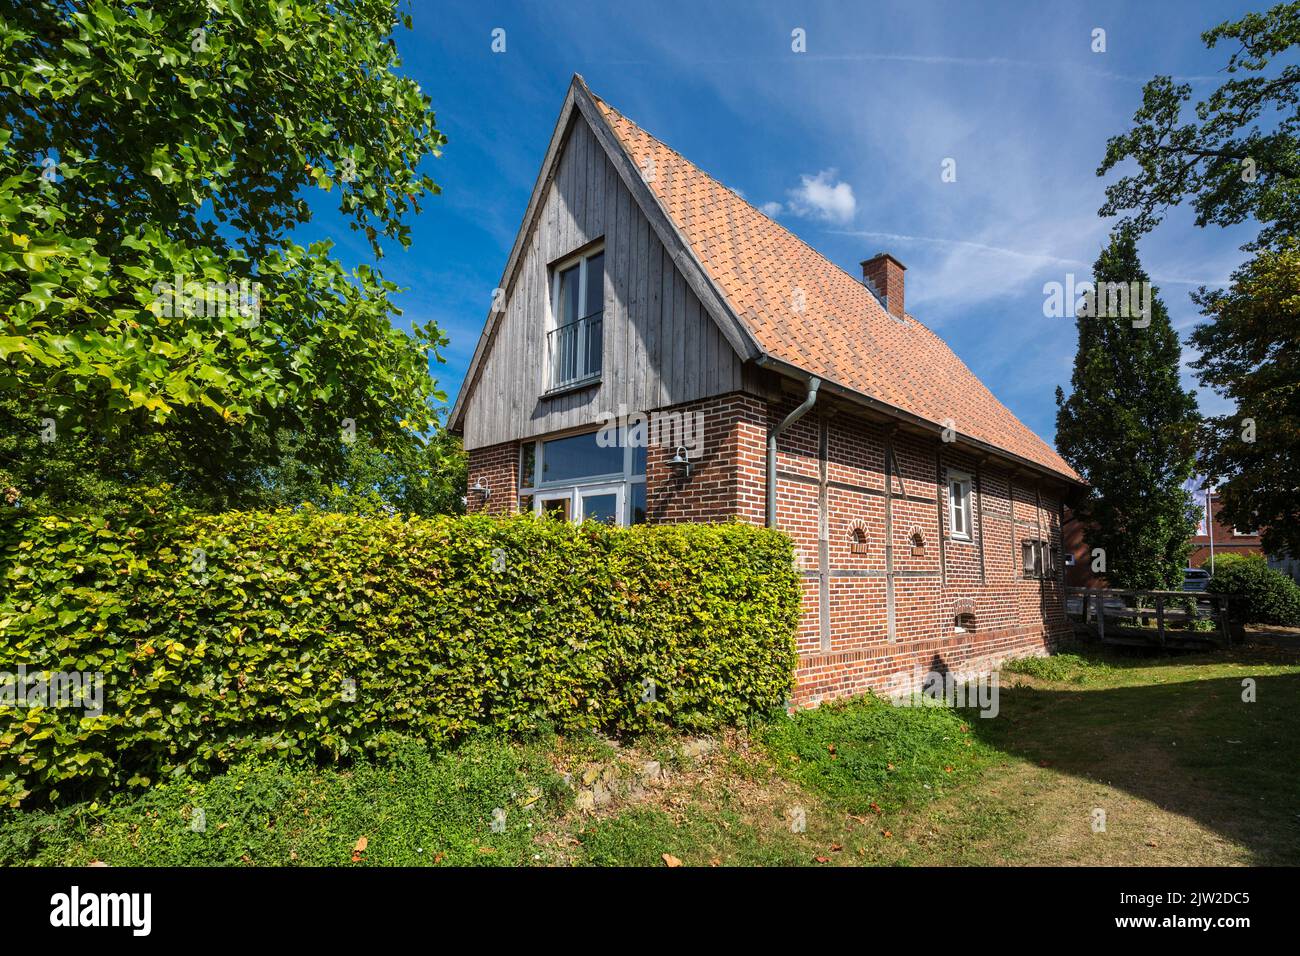 Germany, Rosendahl, Baumberge, Westmuensterland, Muensterland, Westphalia, North Rhine-Westphalia, NRW, Rosendahl-Holtwick, gatehouse of the Holtwick House, former Niederungsburg from the Middle Ages, half-timbered Stock Photo